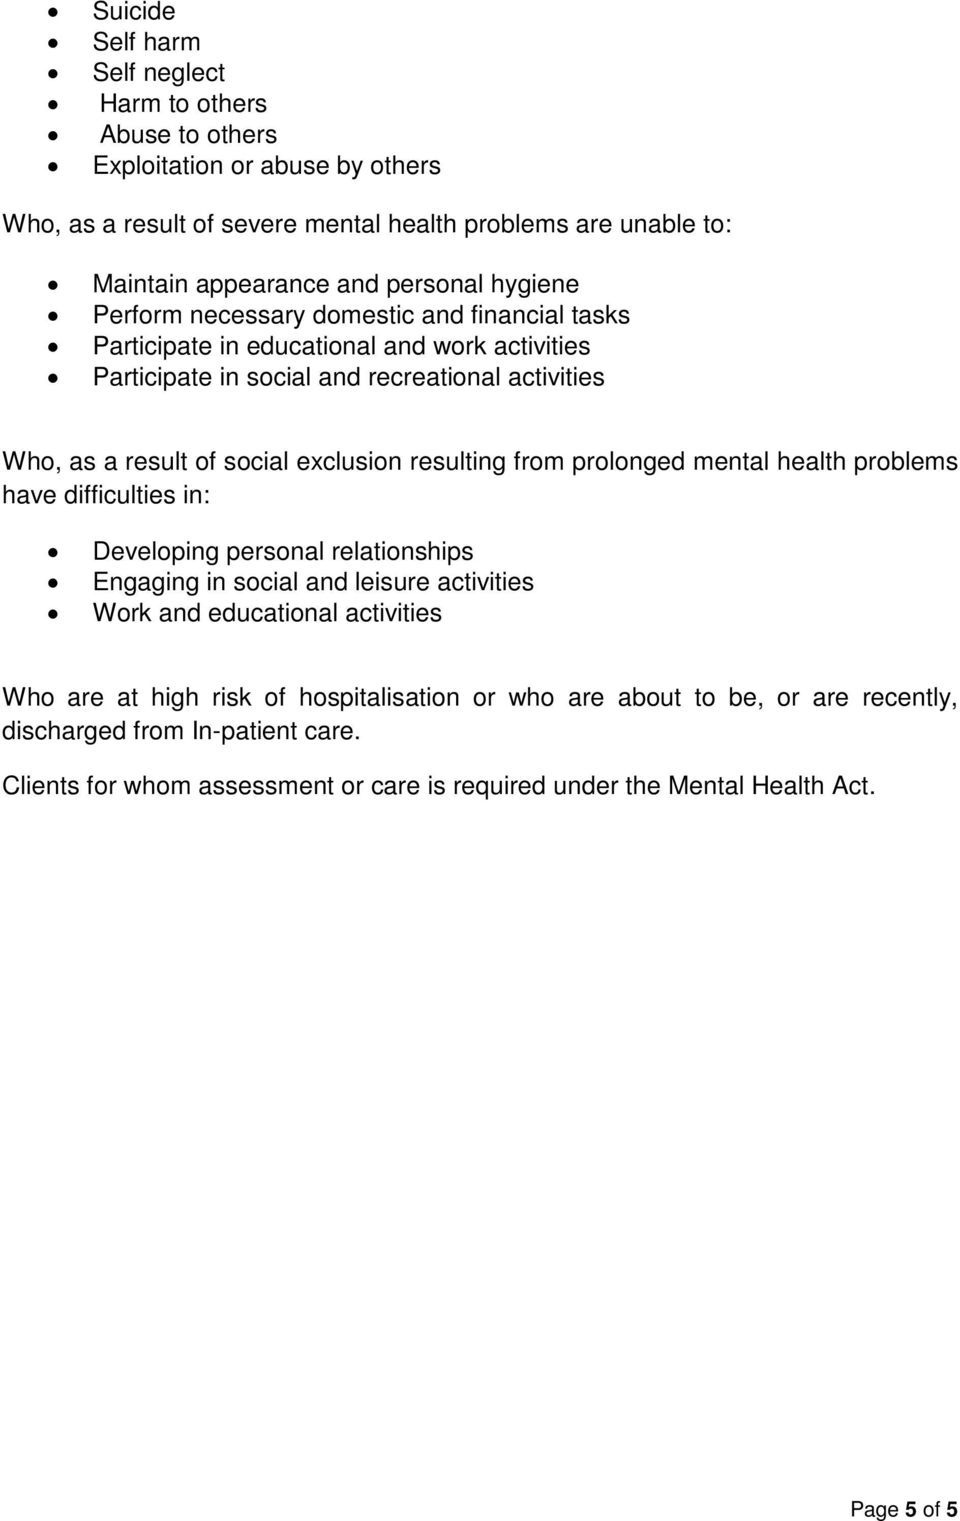 exclusion resulting from prolonged mental health problems have difficulties in: Developing personal relationships Engaging in social and leisure activities Work and educational activities